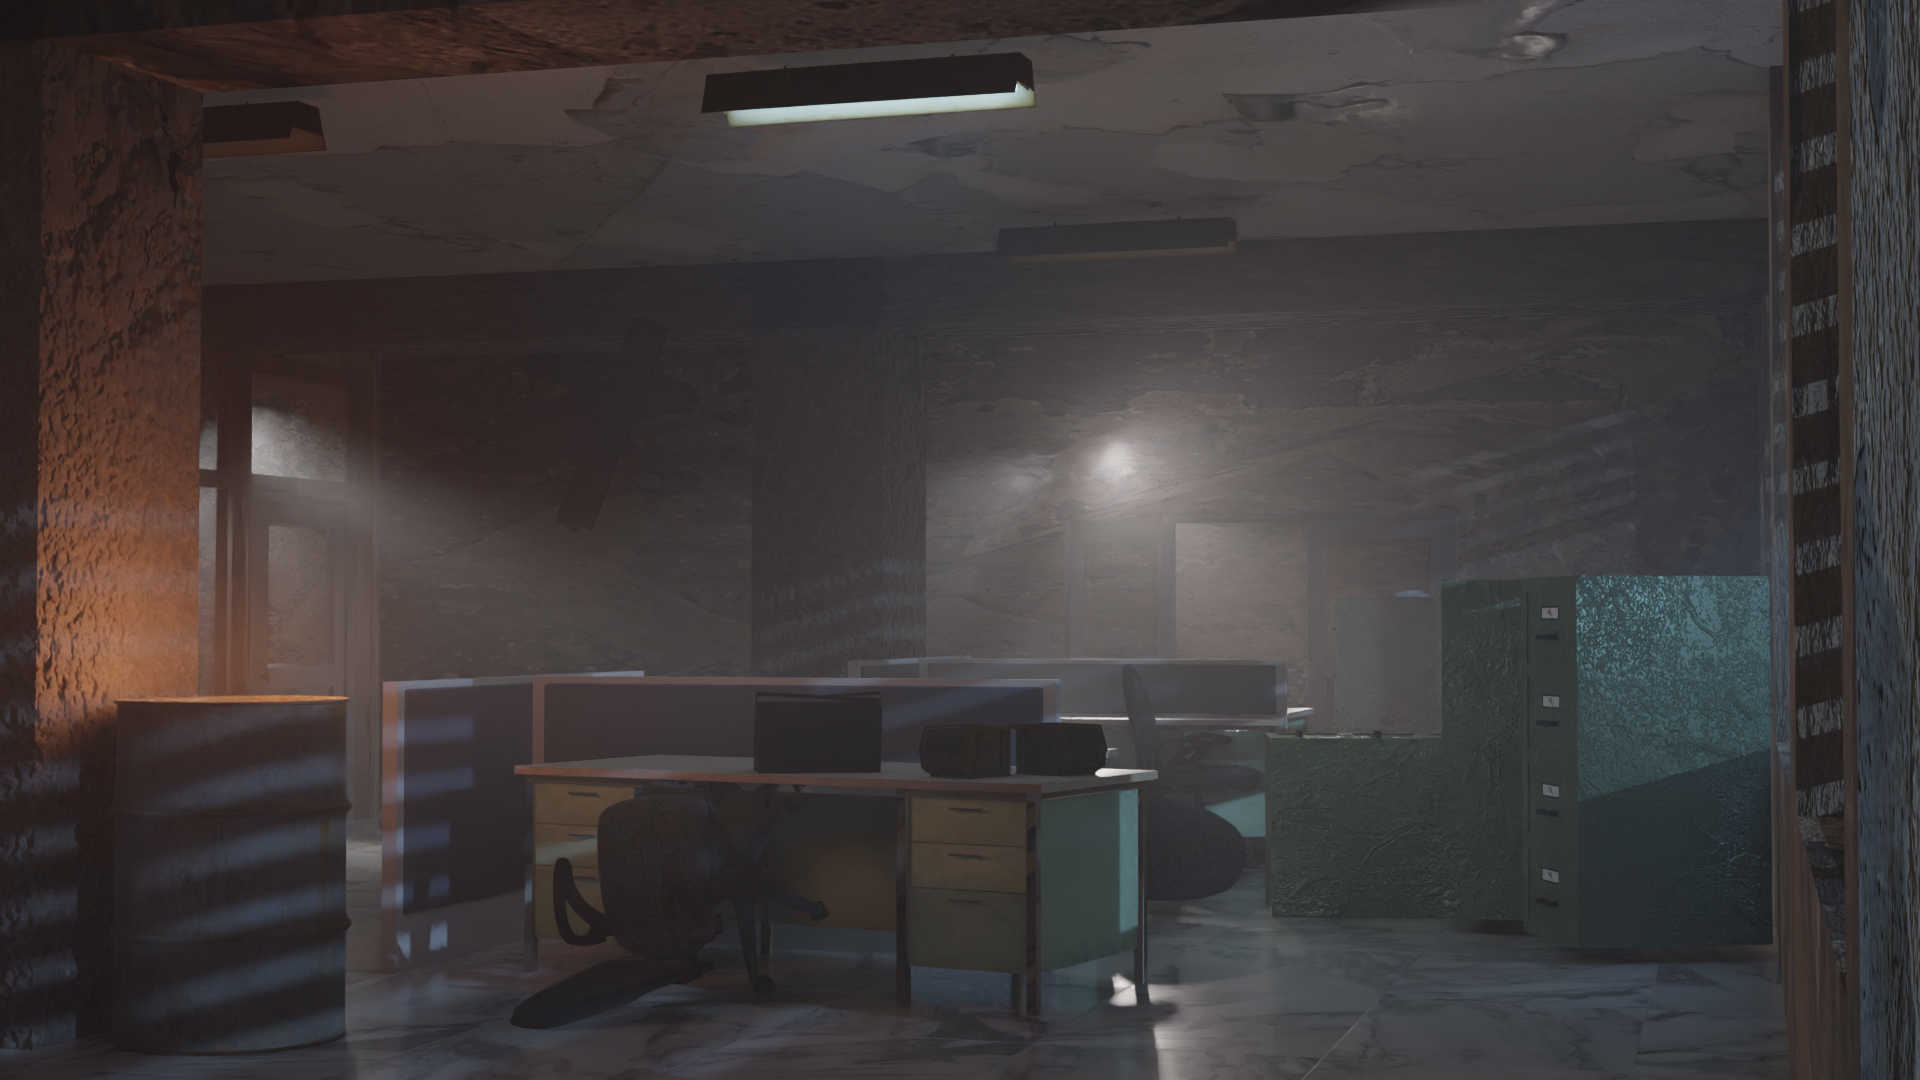 Base render of 3D environment before processing